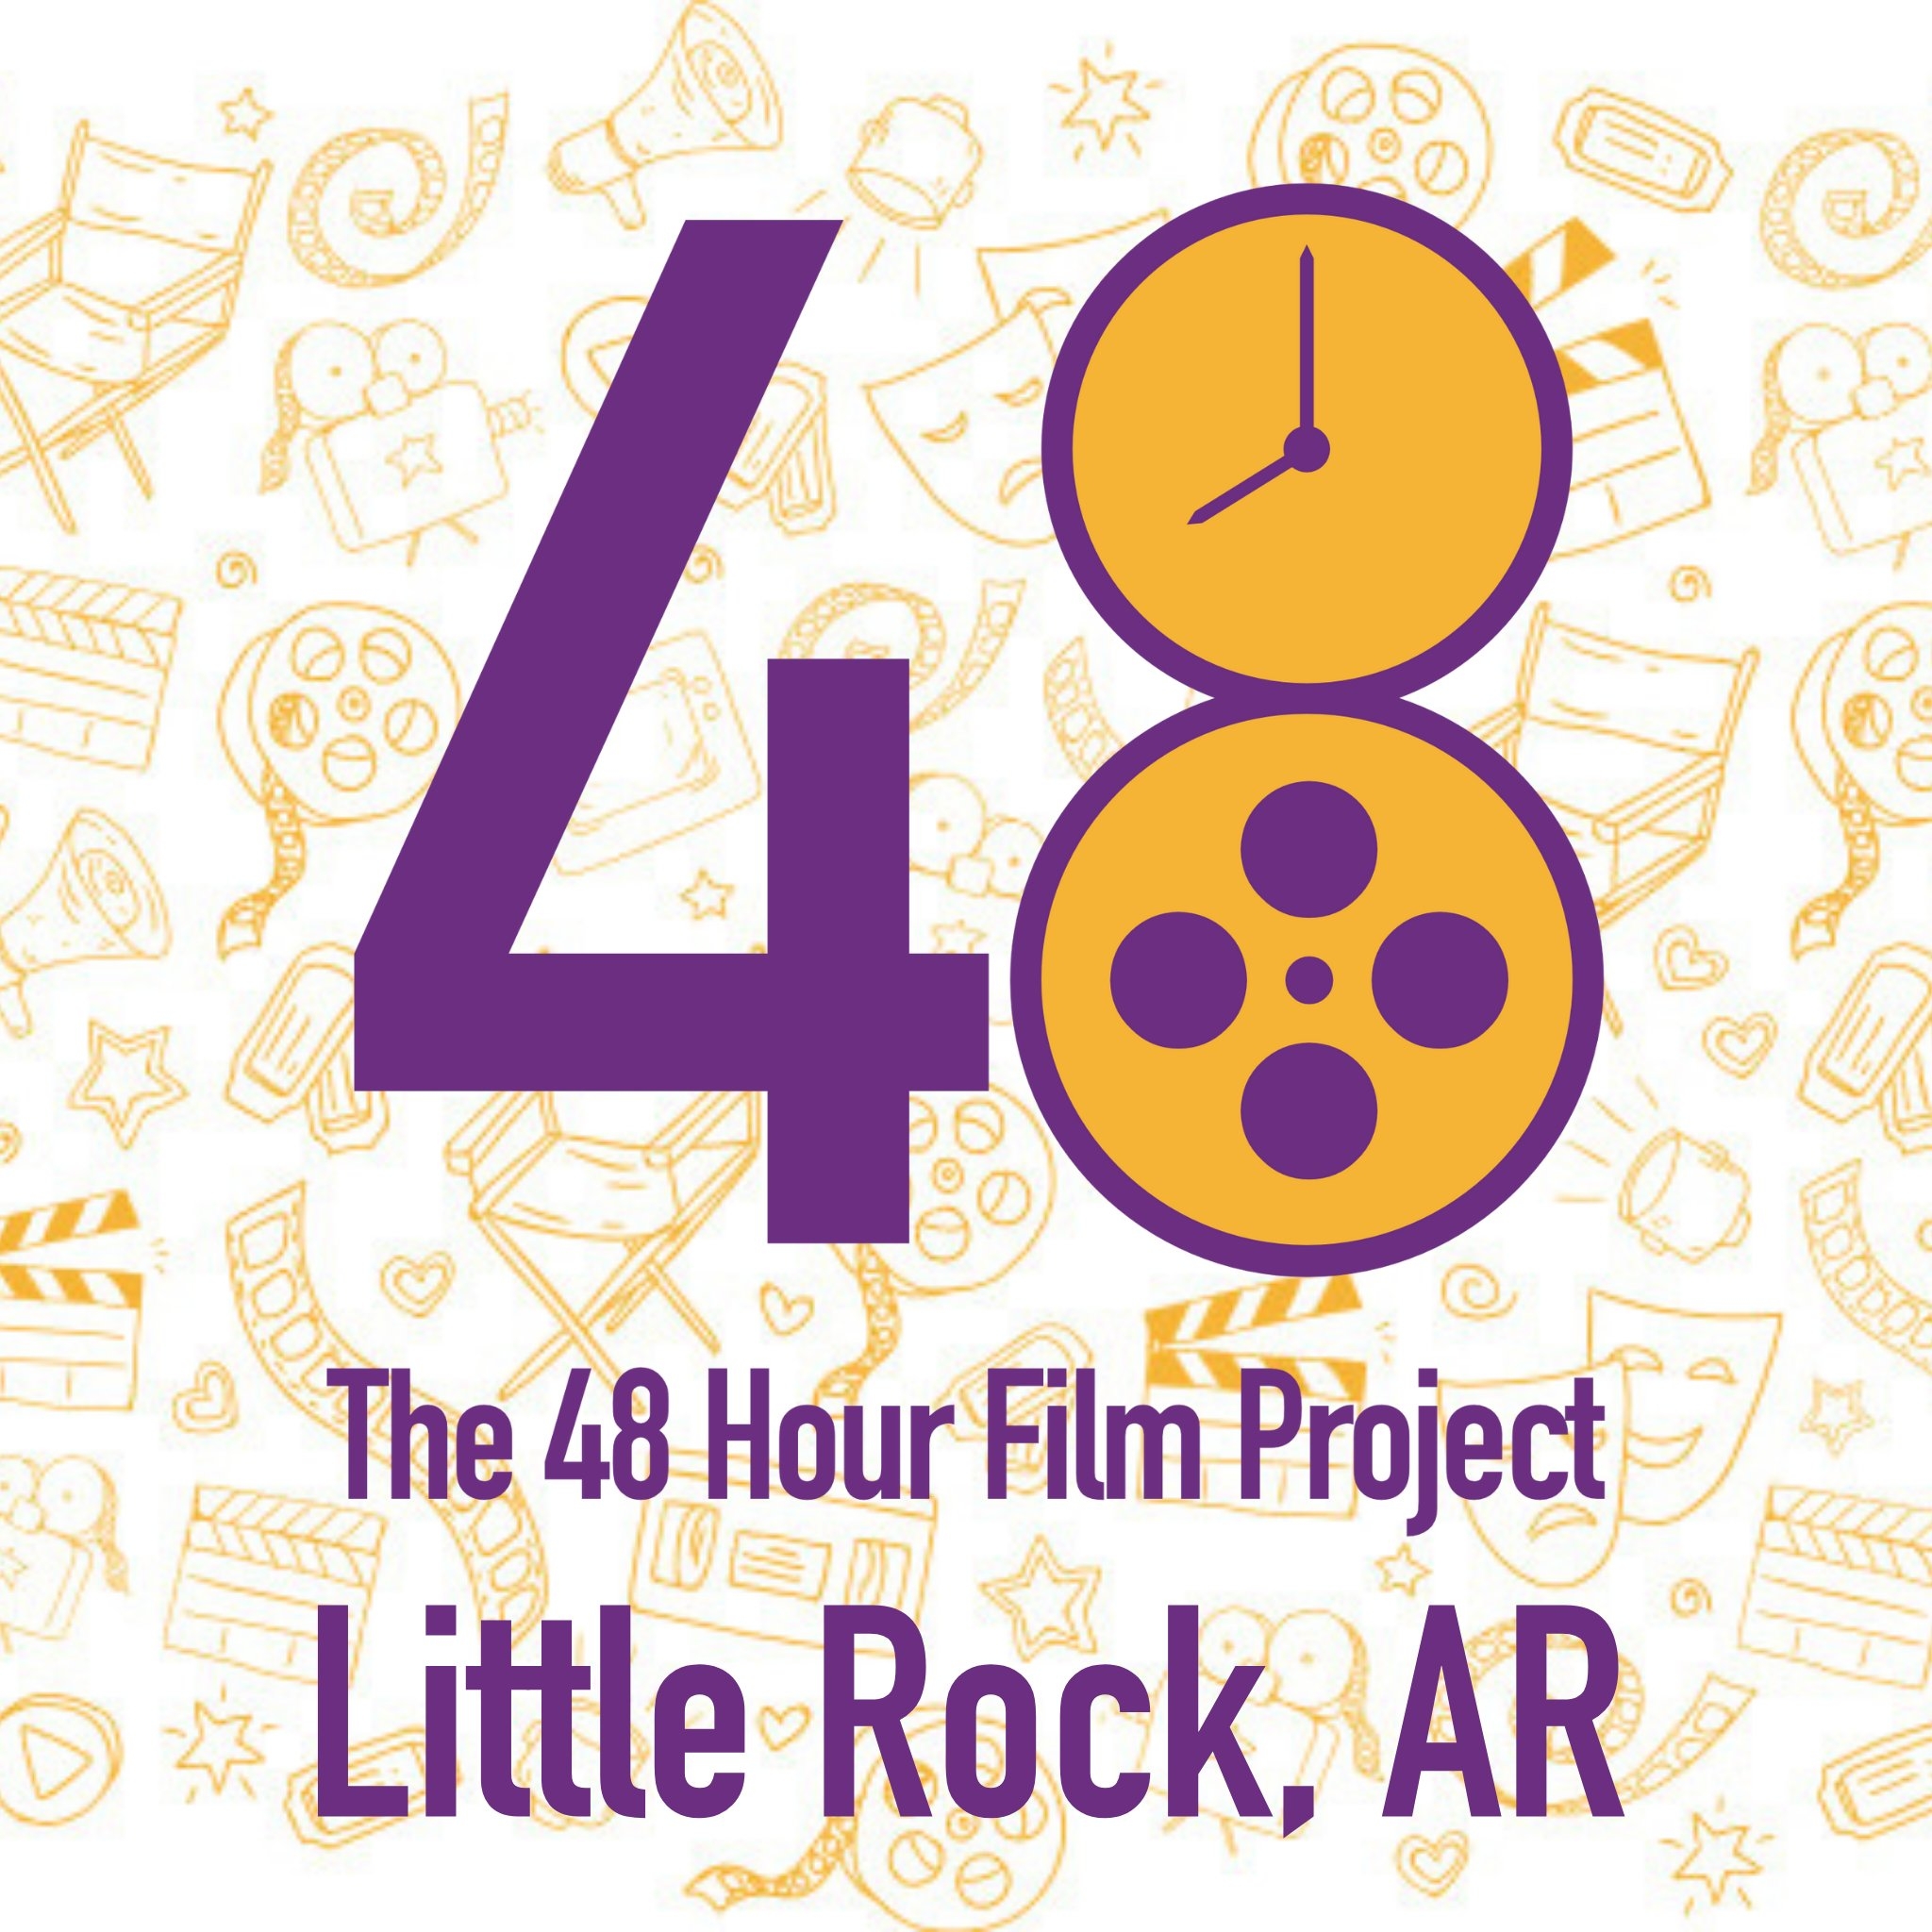 The UA Little Rock School of Literary and Performing Arts is serving as a sponsor for the 48 Hour Film Project. The premiere screenings of the project will debut at 7 p.m. Saturday, Sept. 10, in the University Theatre in the Center for Performing Arts on the UA Little Rock campus.